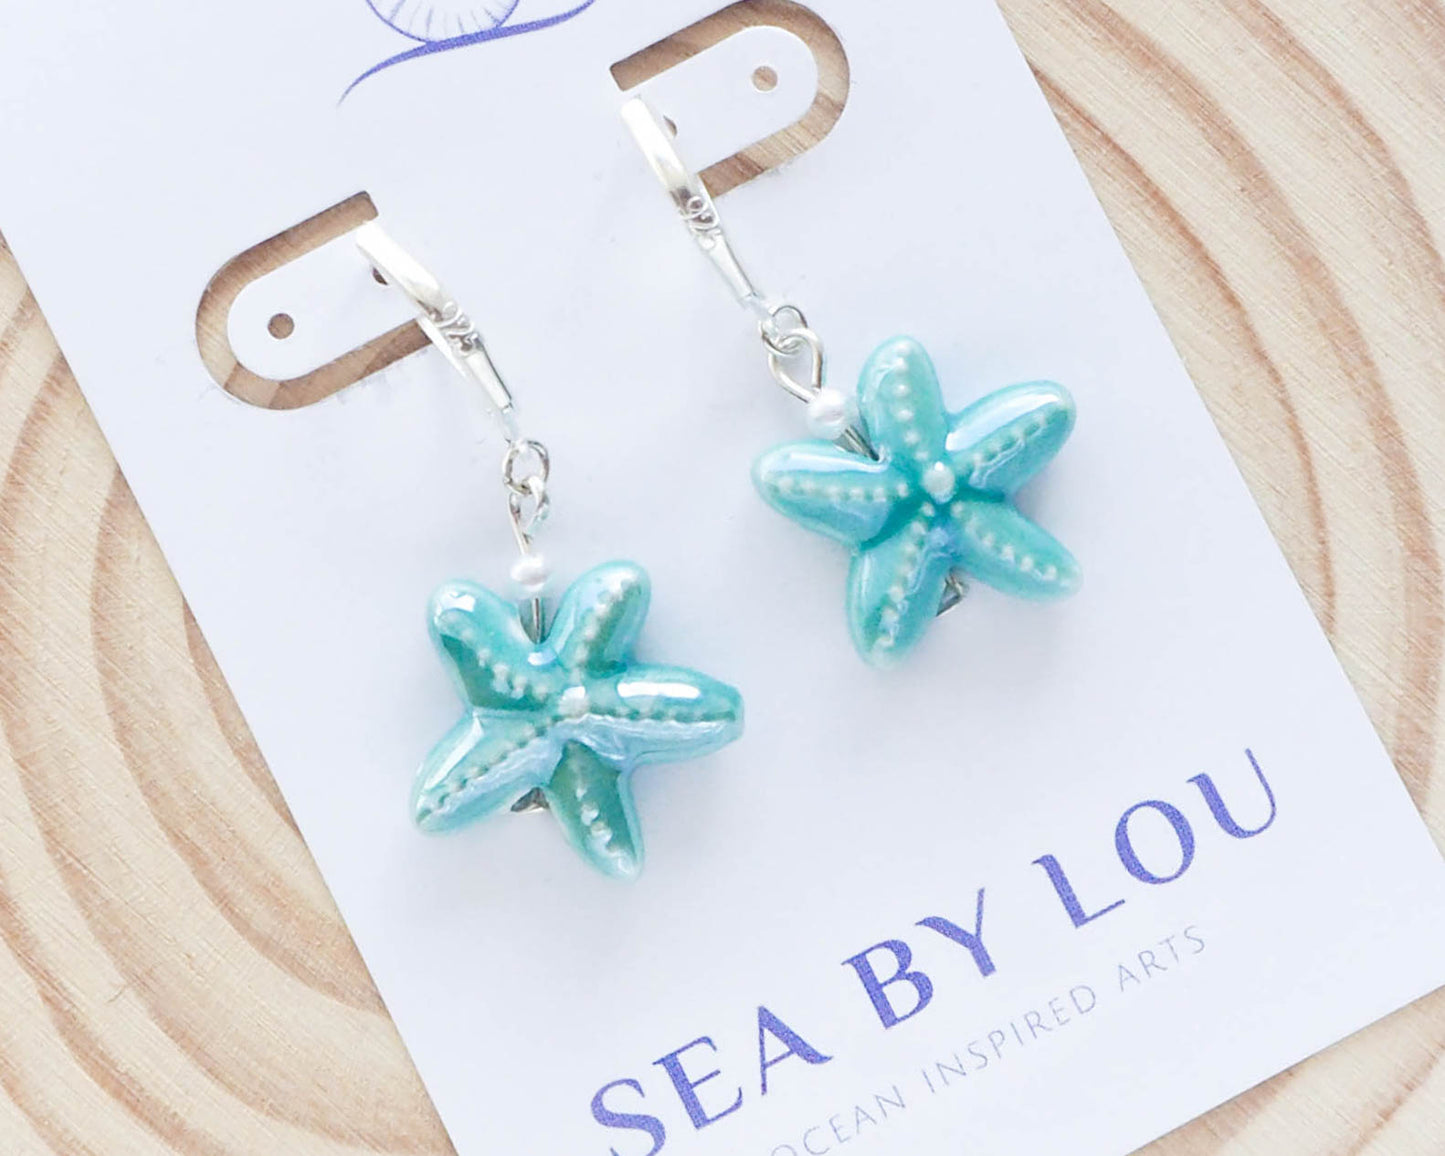 Sea Star Ceramic Earrings in Turquoise, Starfish Earrings from Portugal